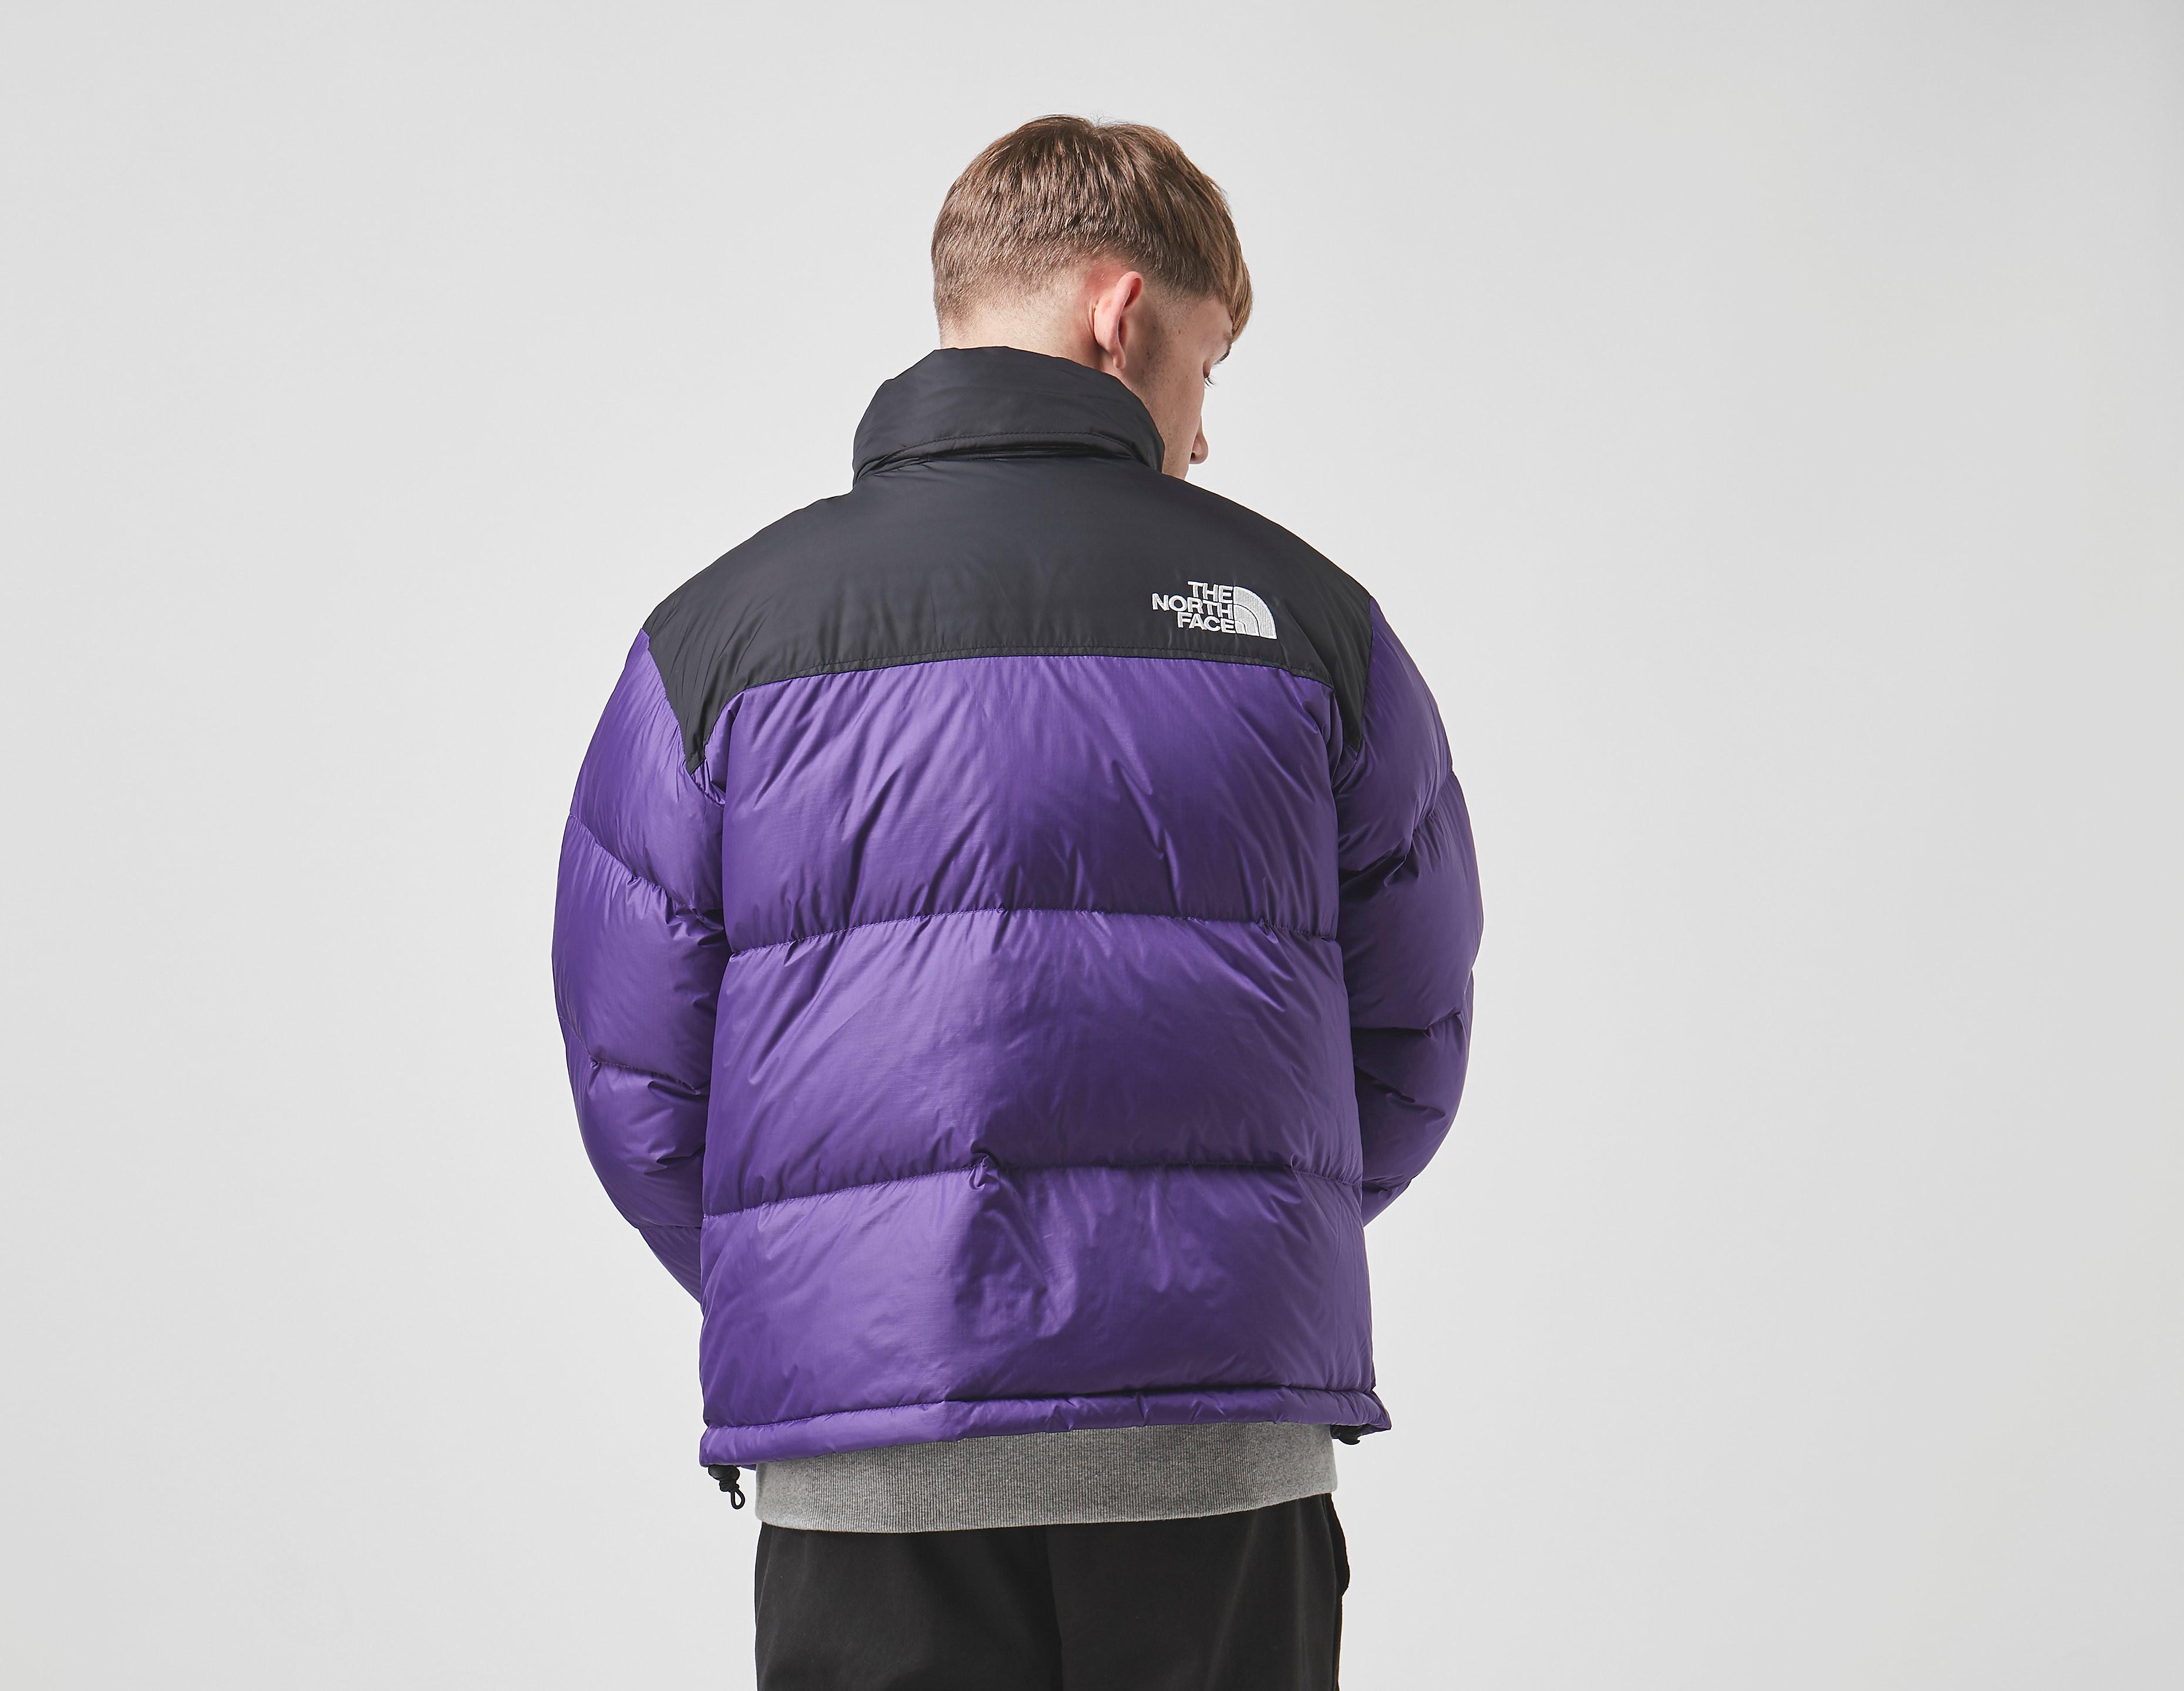 Doudoune The North Face 1996 Violet Luxembourg, SAVE 31% - www.pnsb.org